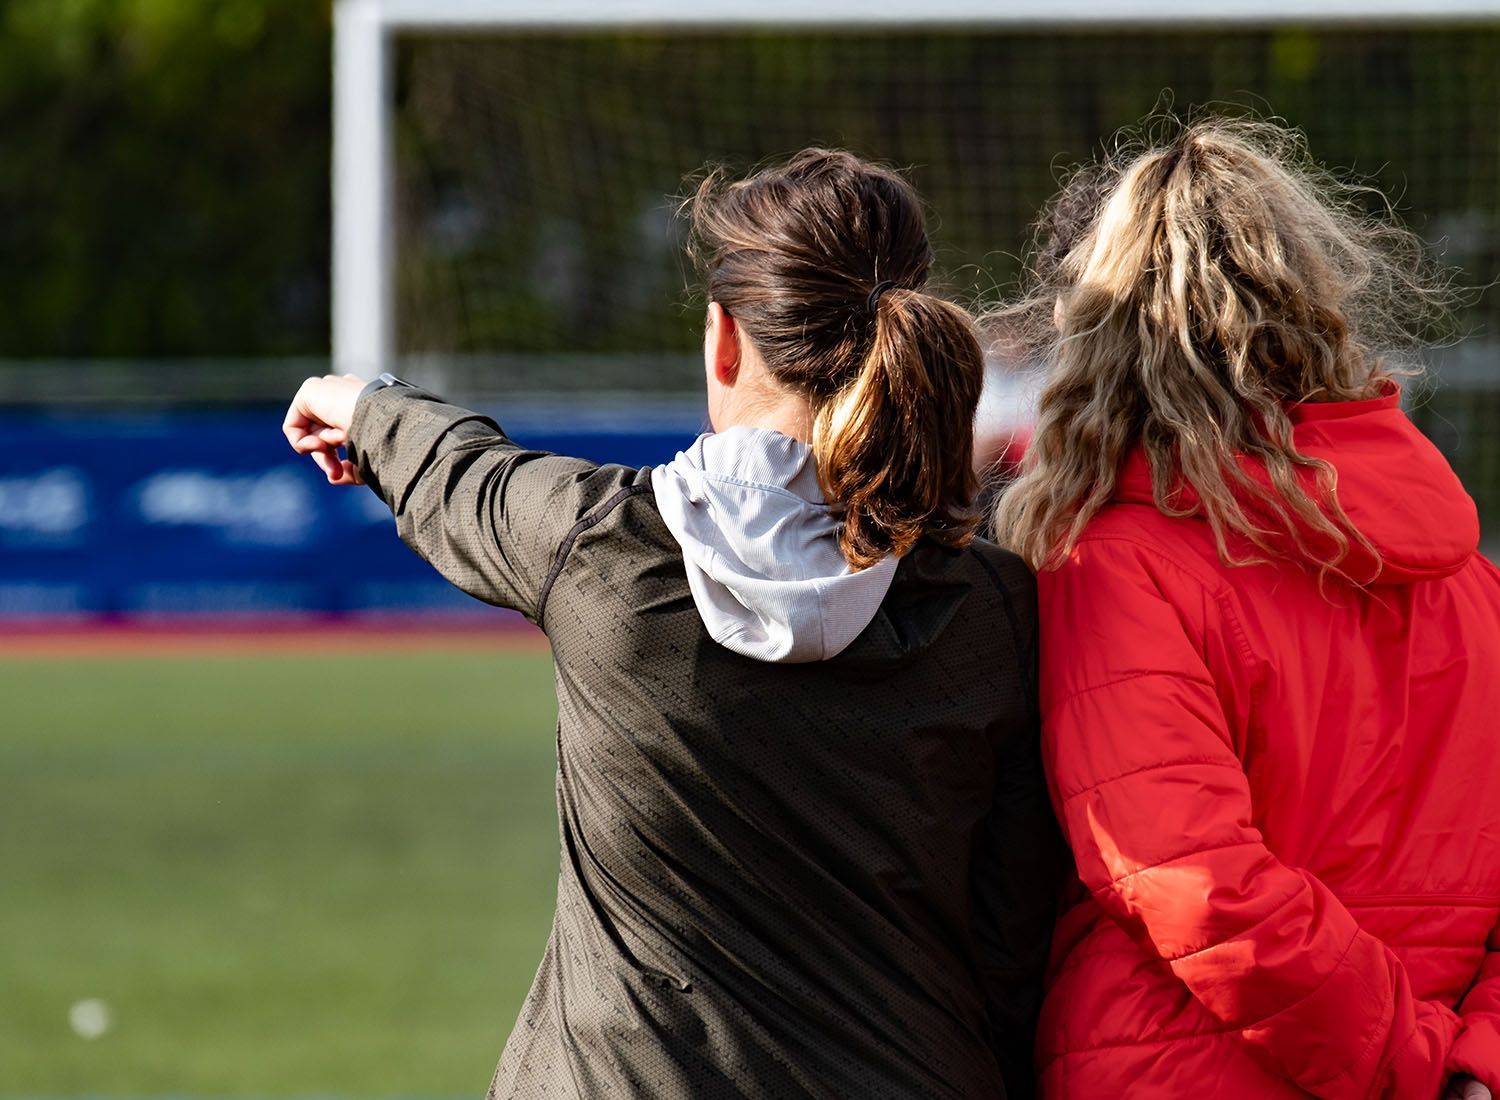 How can B1 help women’s soccer players